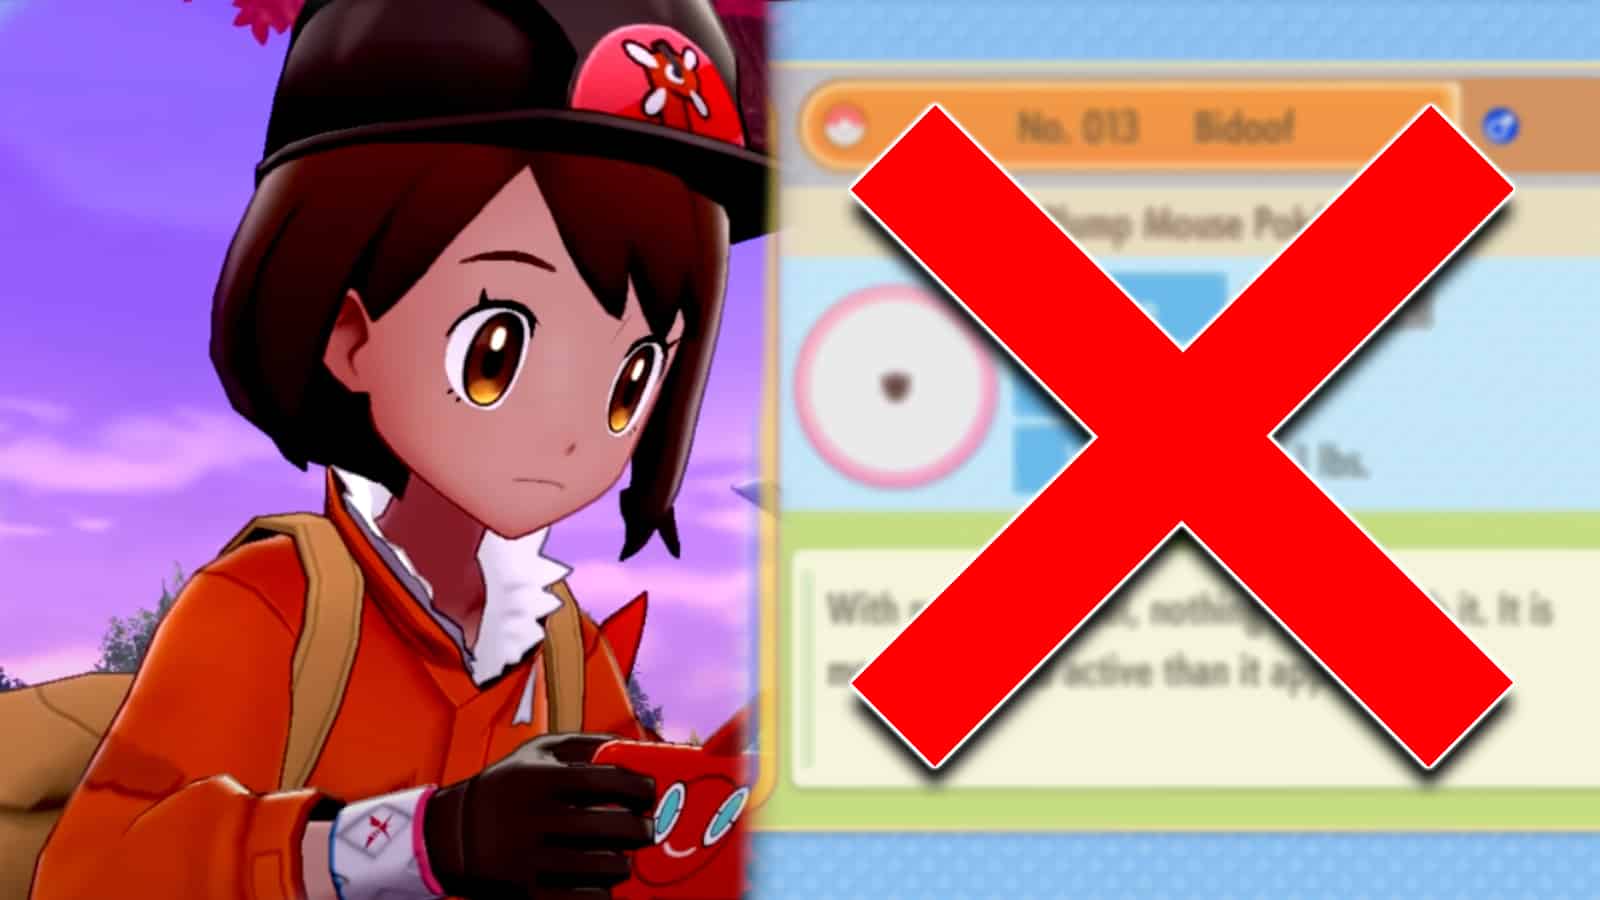 Pokémon Brilliant Diamond & Shining Pearl is a new low for Game Freak